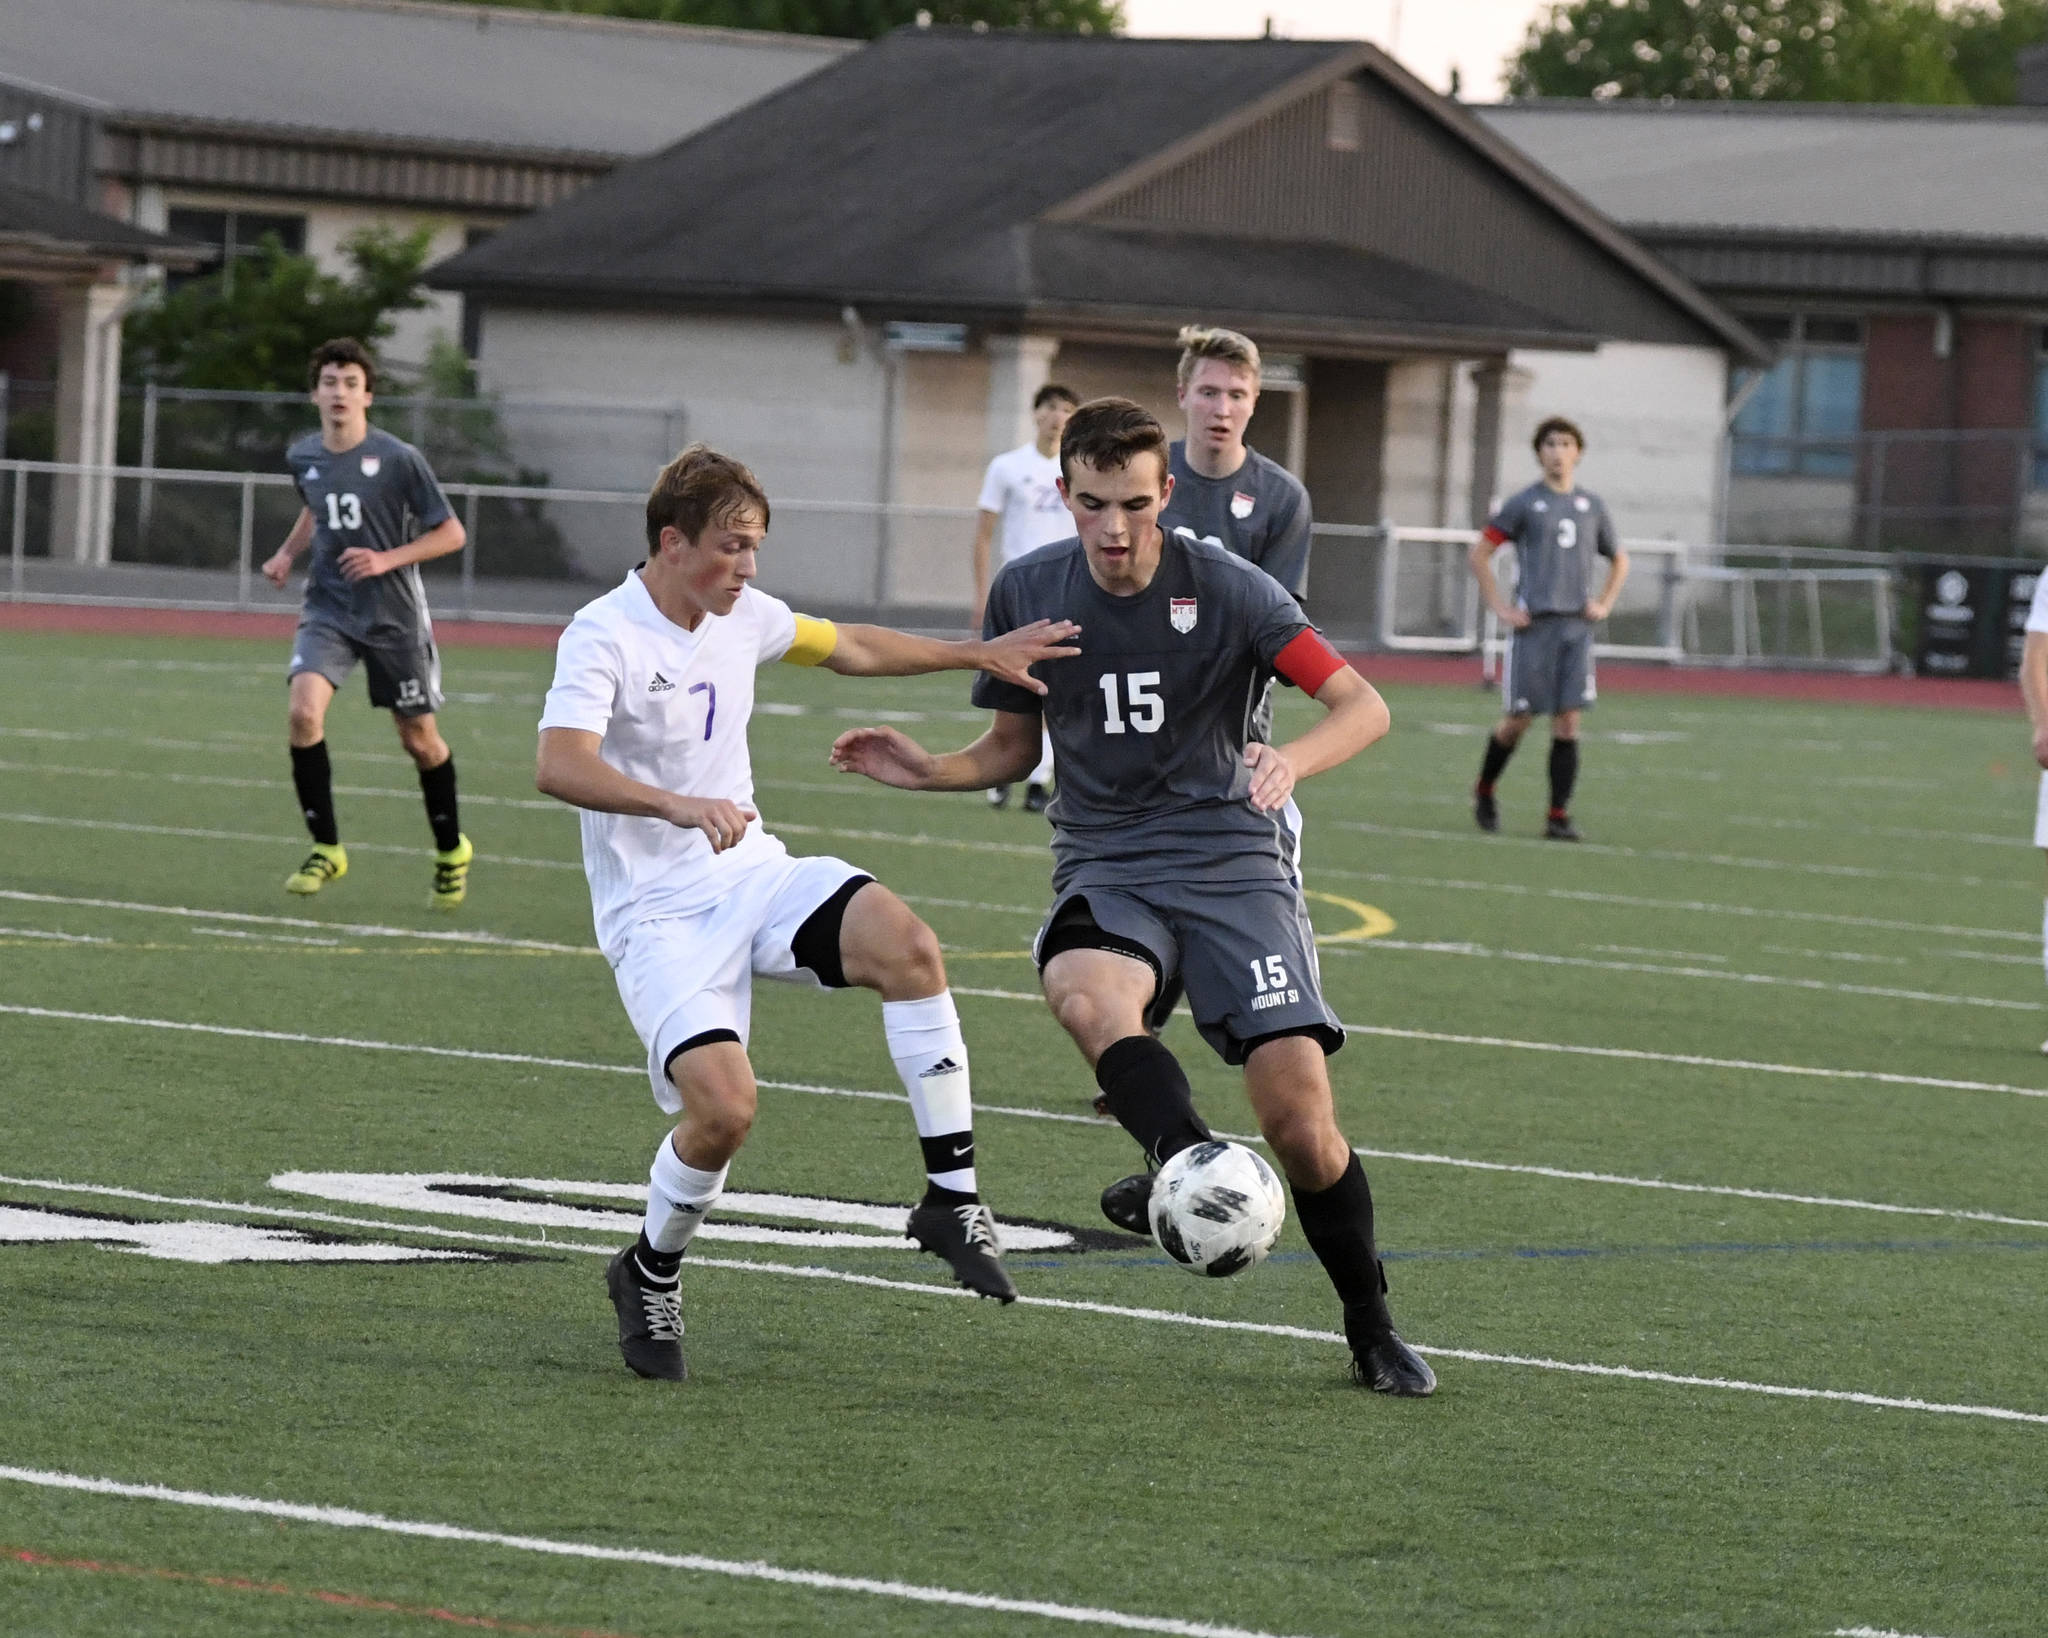 Photo courtesy of Calder Productions                                Mount Si senior forward Alec Bothwell, right, tries to maneuver around Sumner midfielder Ryan Griffith in the first round of the Class 4A state soccer playoffs on May 15 at Sunset Chev Stadium in Sumner.